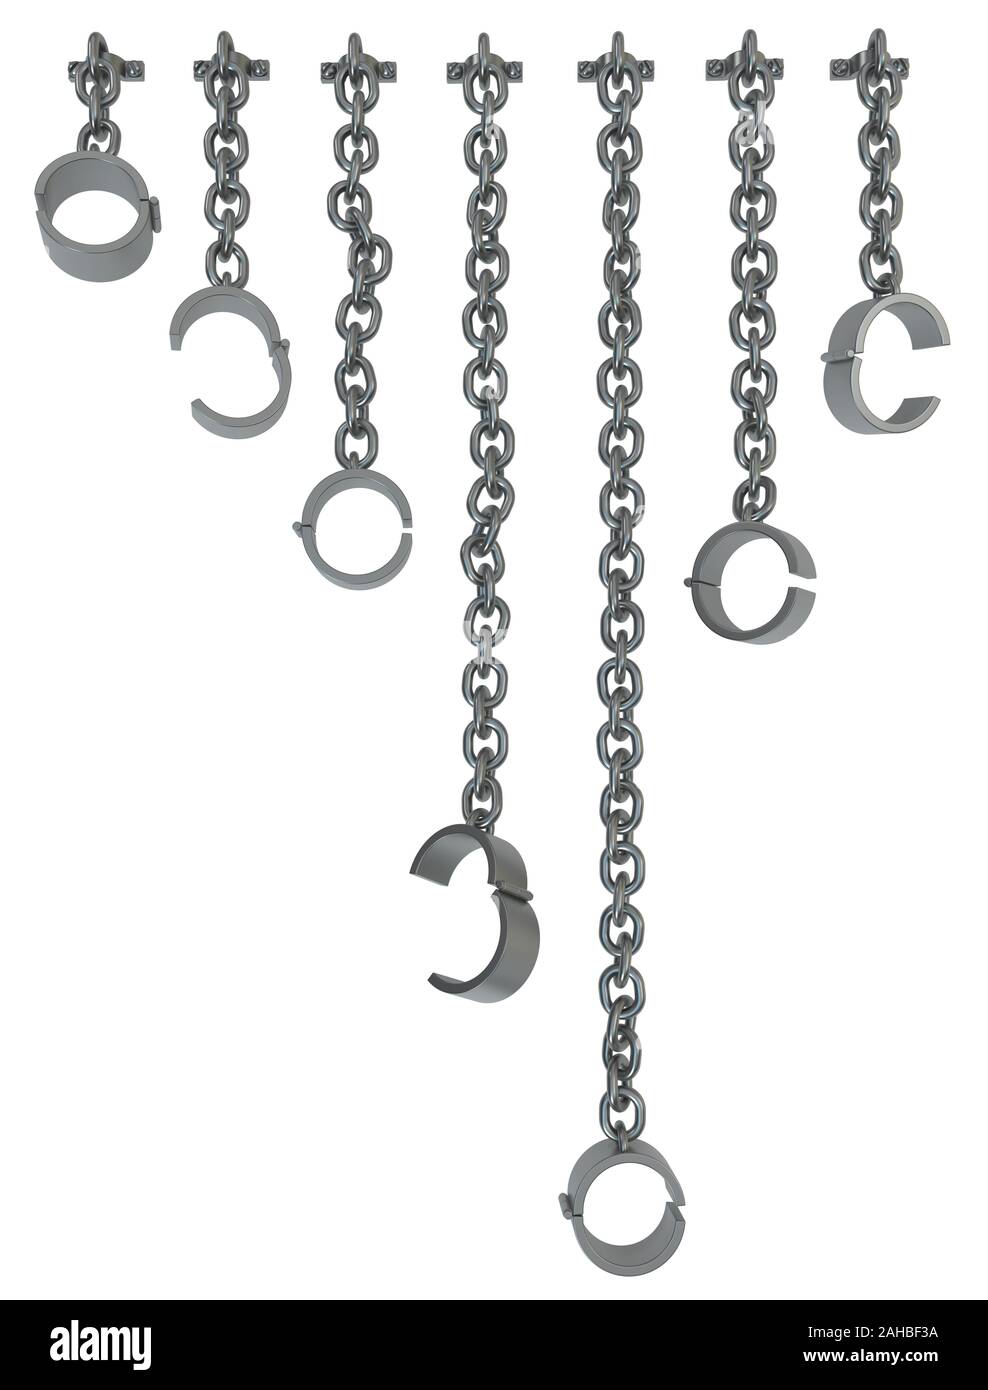 Shackles chain attached hanging selection lengths grey metal 3d illustration, isolated, vertical, over white Stock Photo